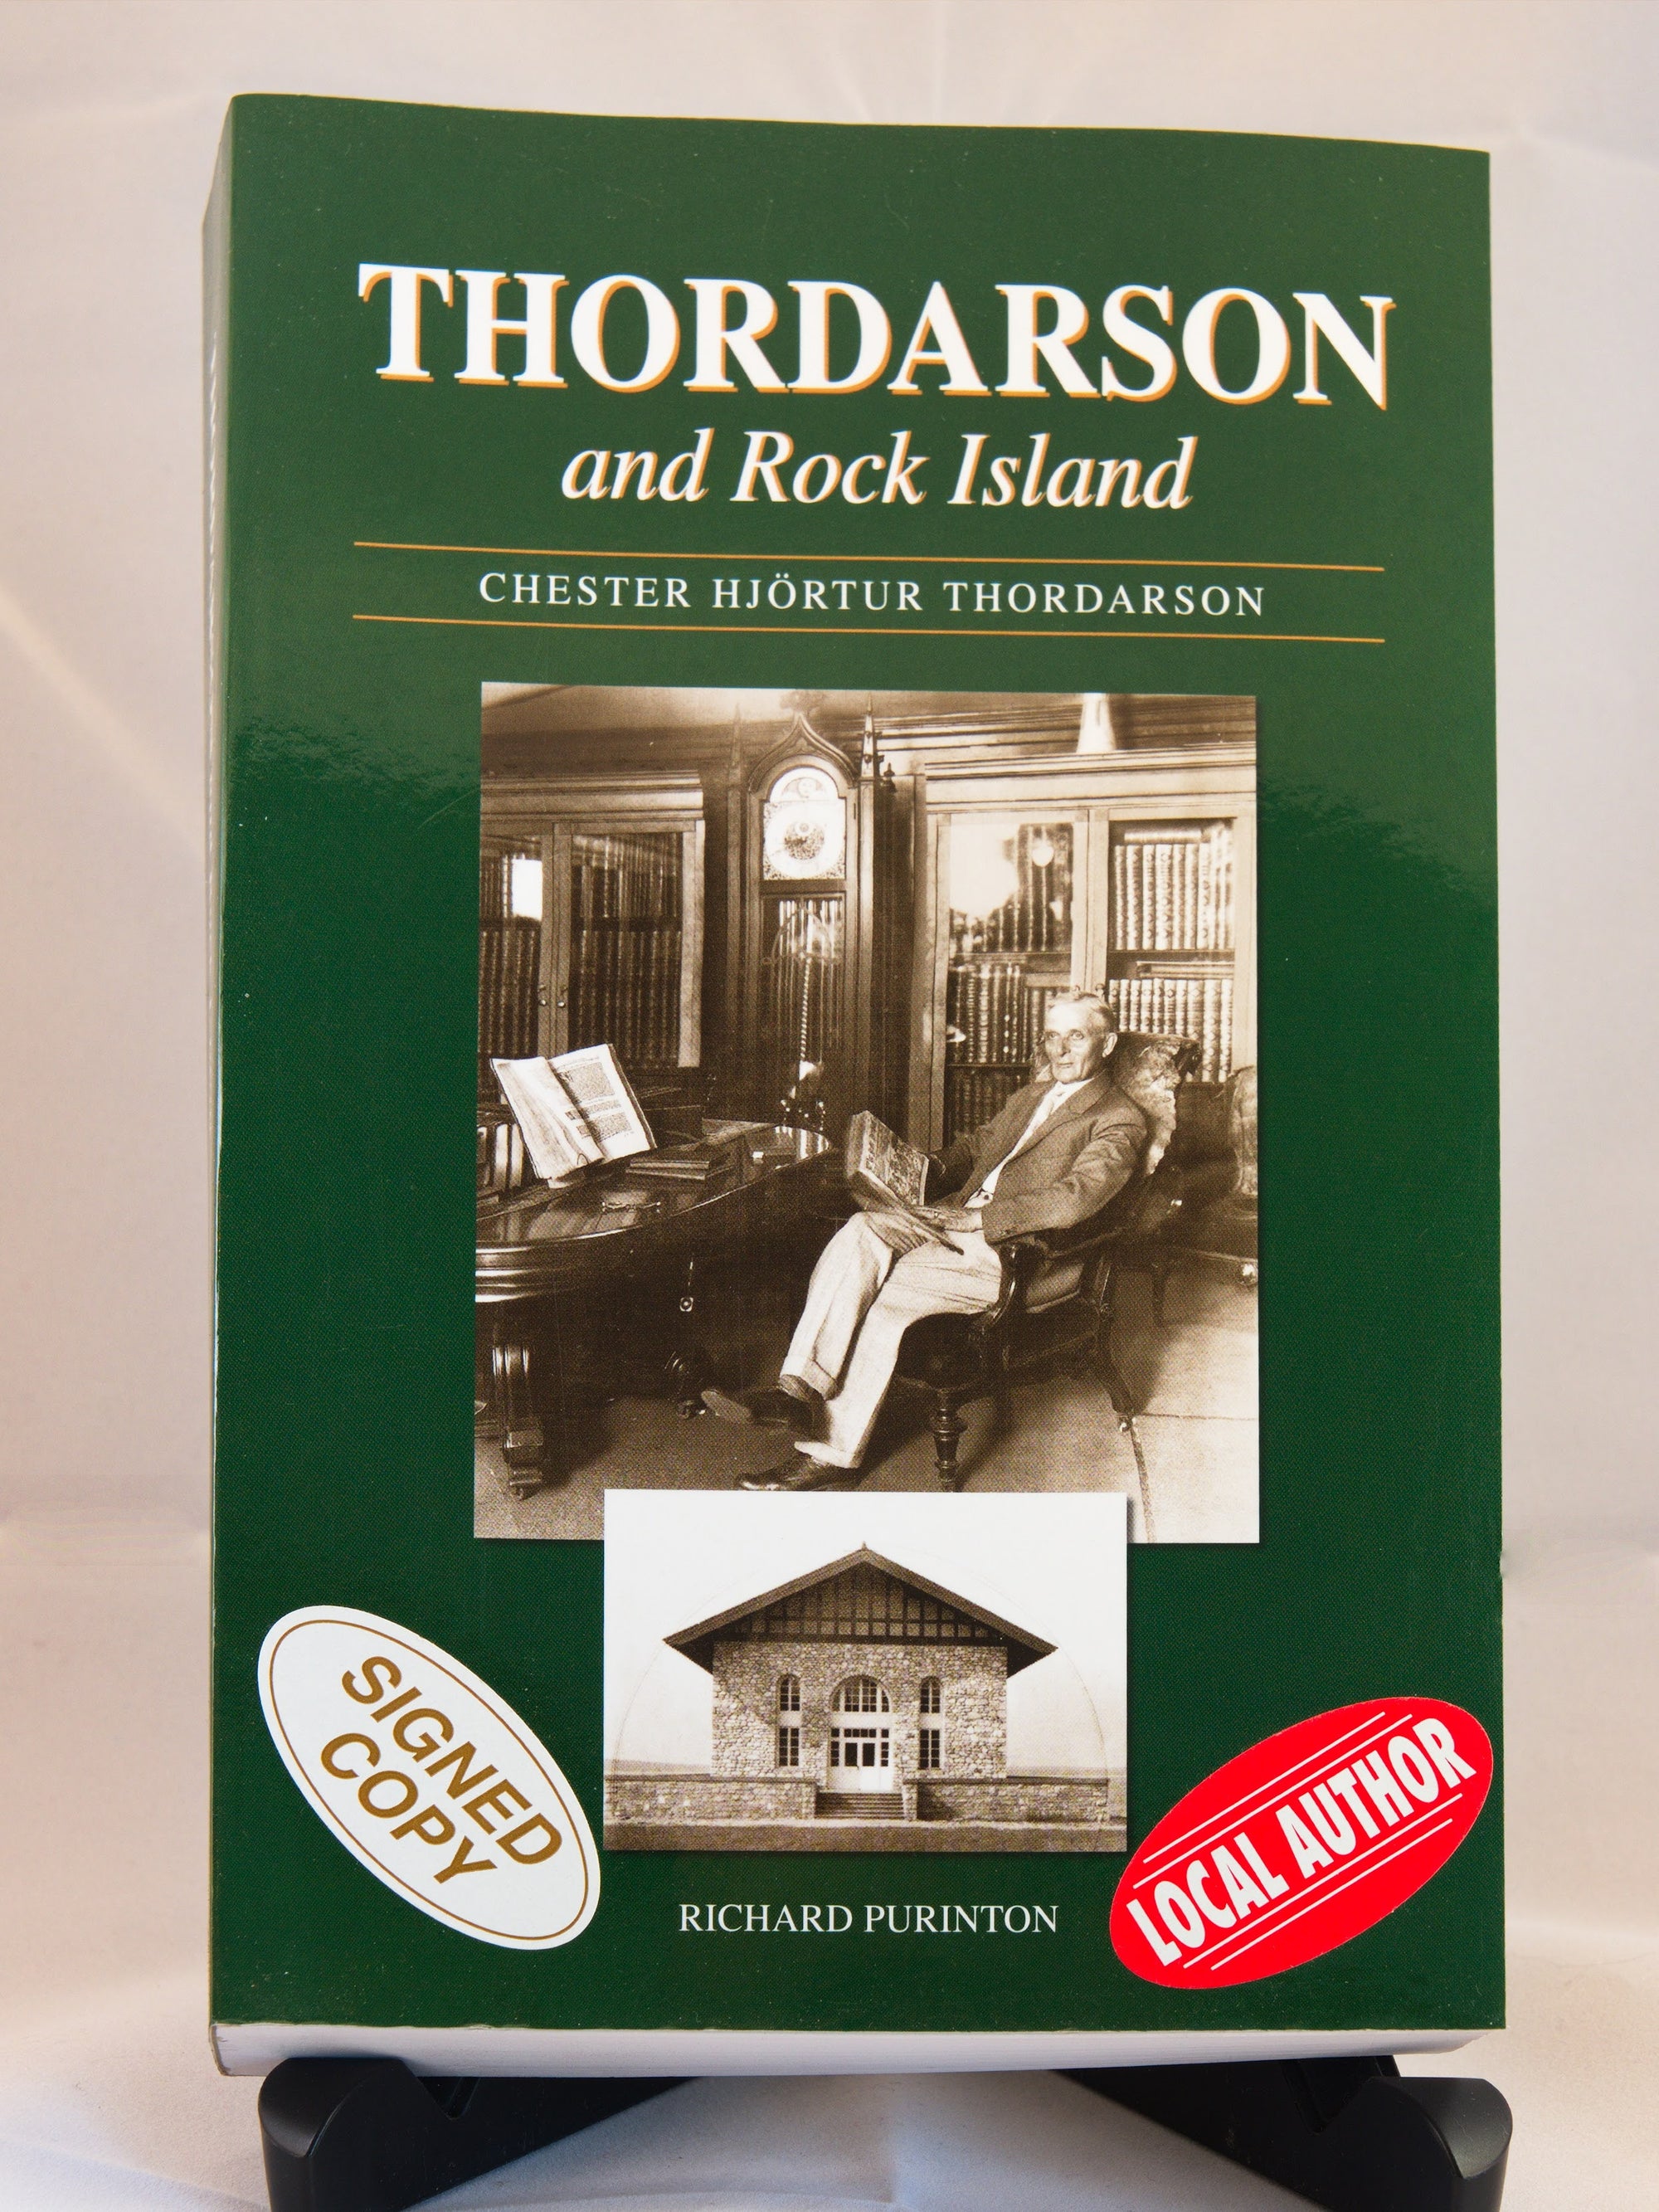 Thordarson and Rock Island by author Richard Purinton - signed copy (IS)